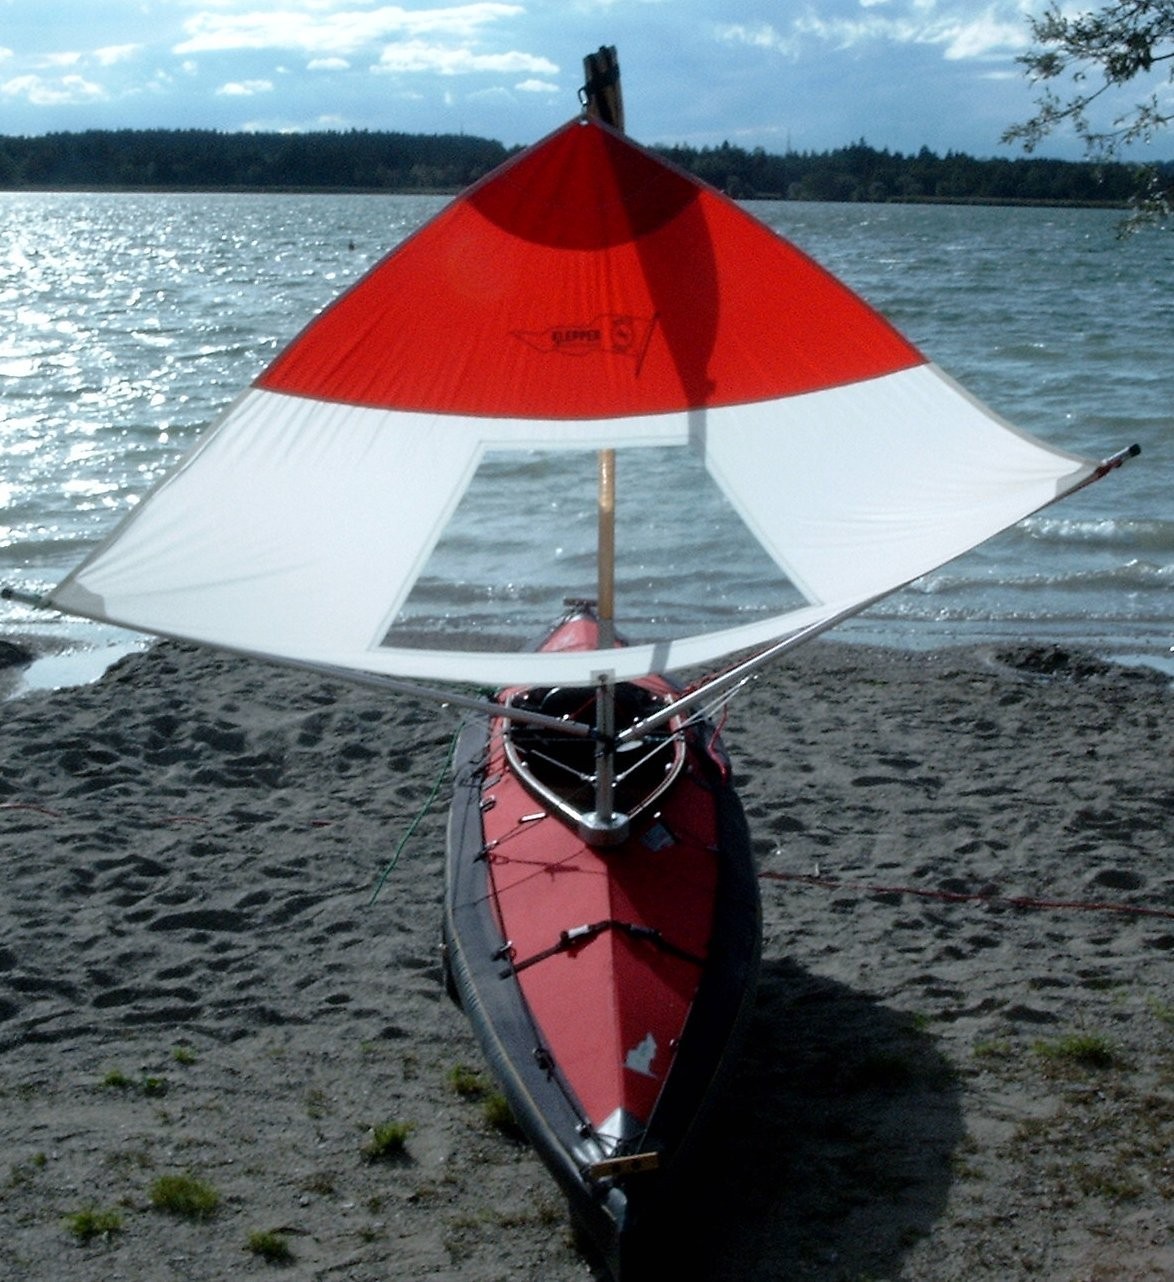 Driftsail "Freewind", white - blue, including viewing window